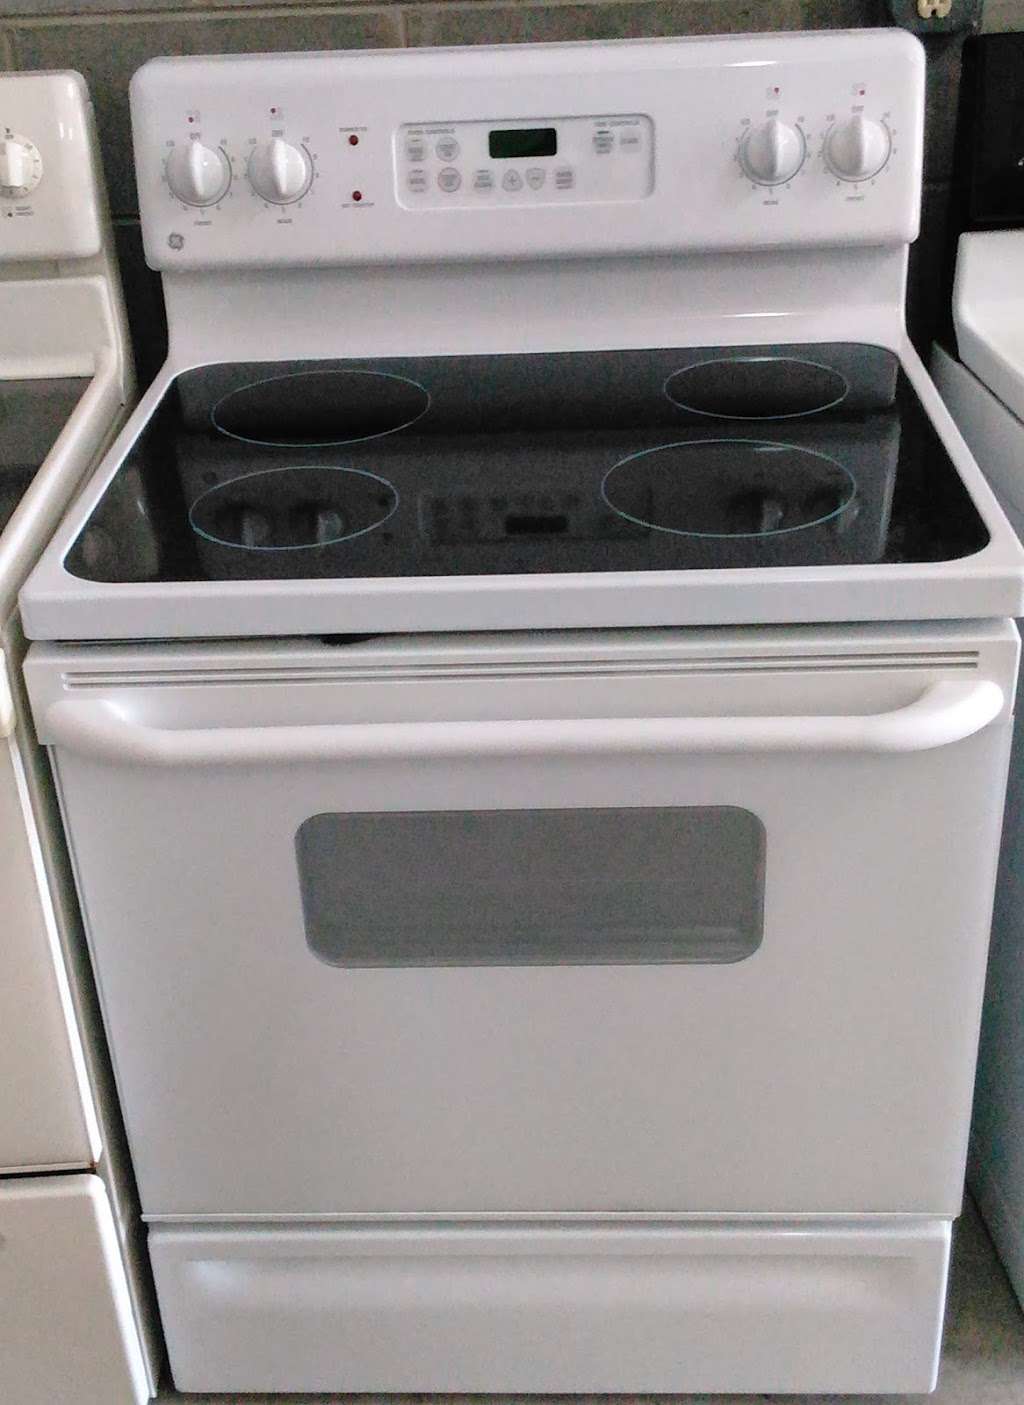 Quality Used Appliances | Photo 9 of 10 | Address: 7590 E Hwy 25, Belleview, FL 34420, USA | Phone: (352) 434-2204